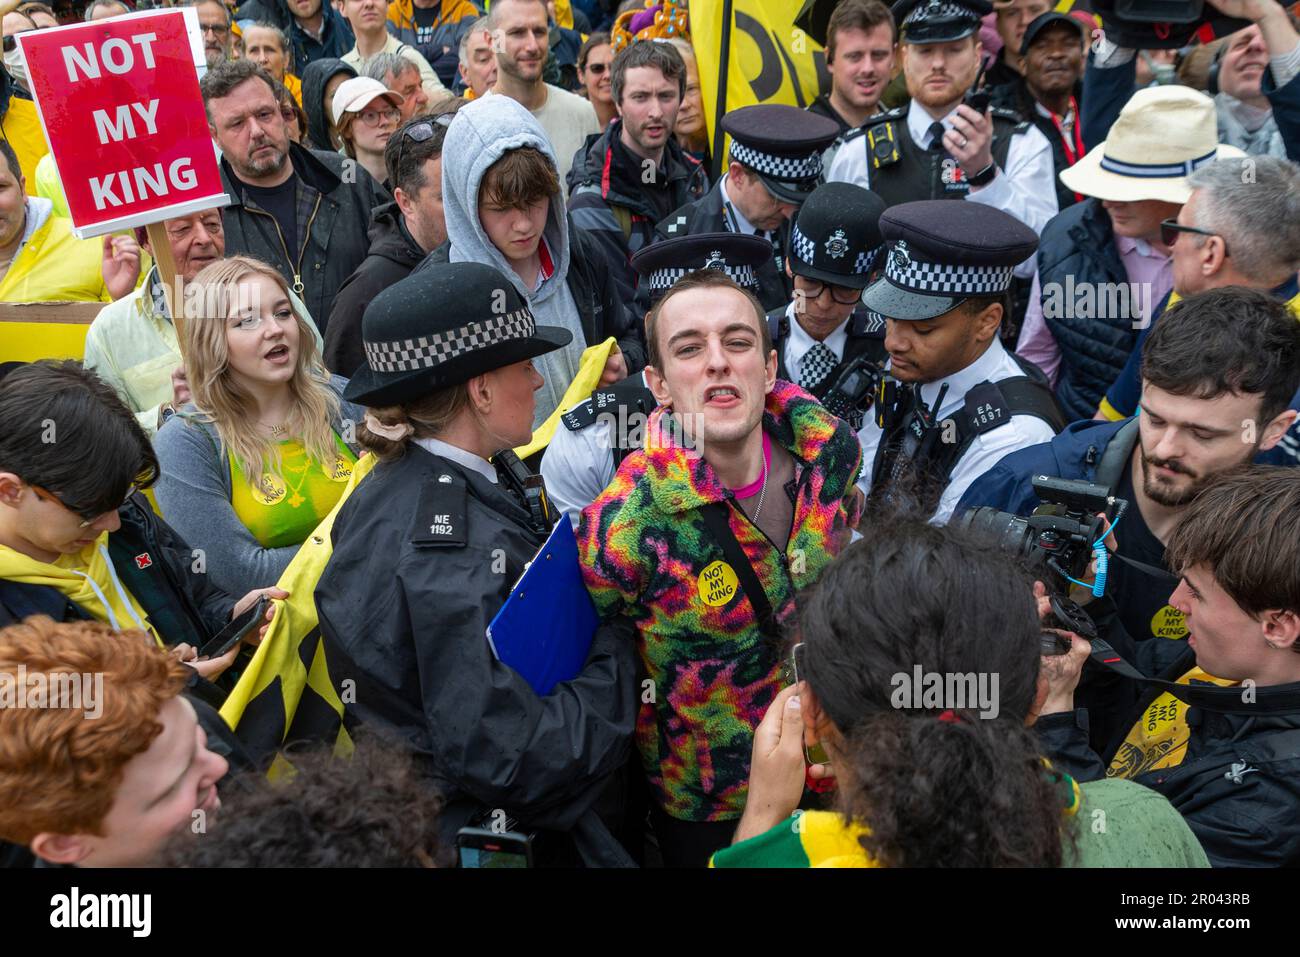 Patrick Thelwell, previously arrested for throwing eggs at King Charles and warned to stay away, being arrested at the Coronation with protesters Stock Photo